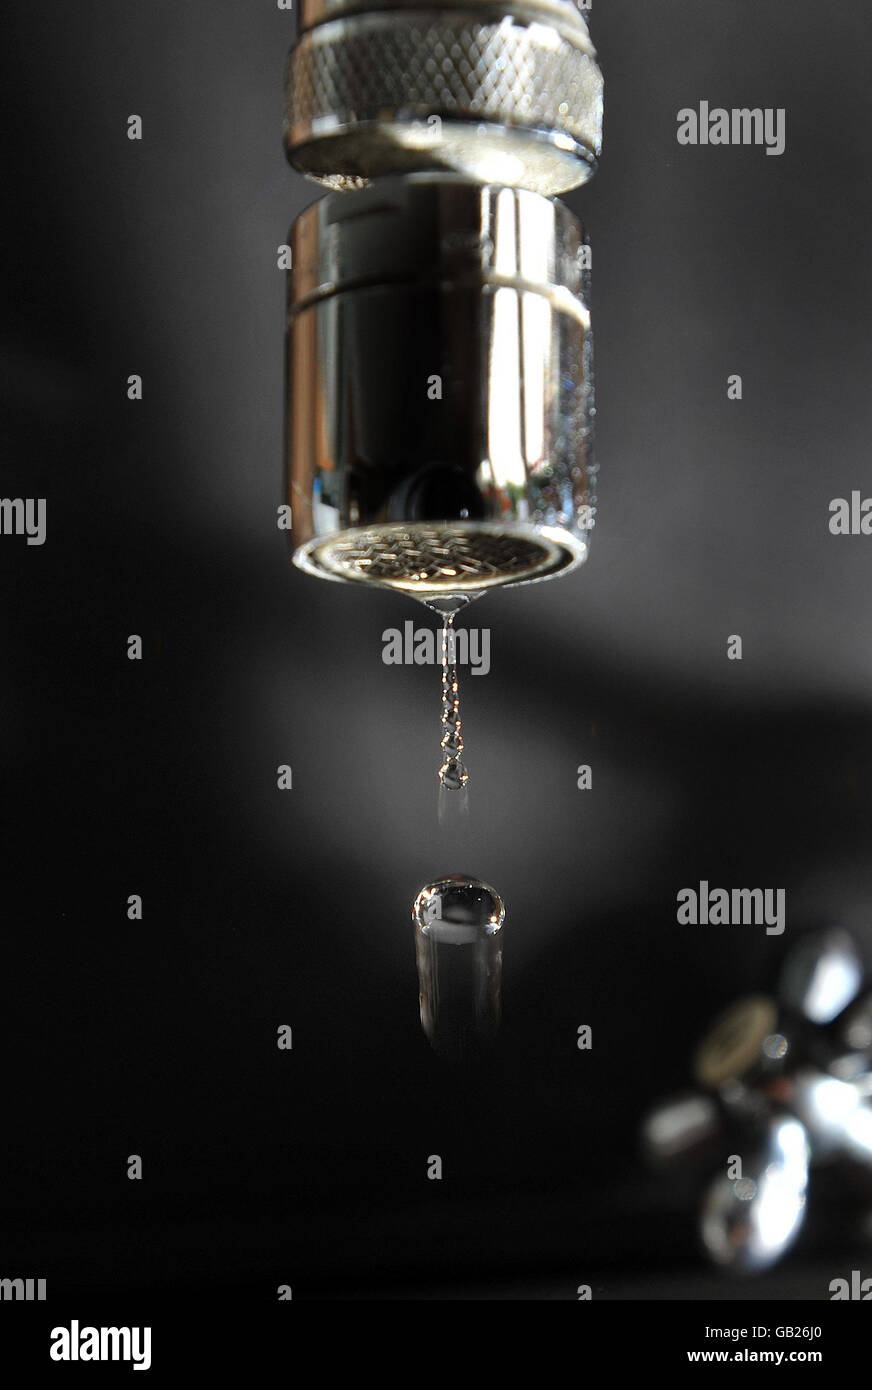 A general view of water dripping out of a kitchen tap. Stock Photo